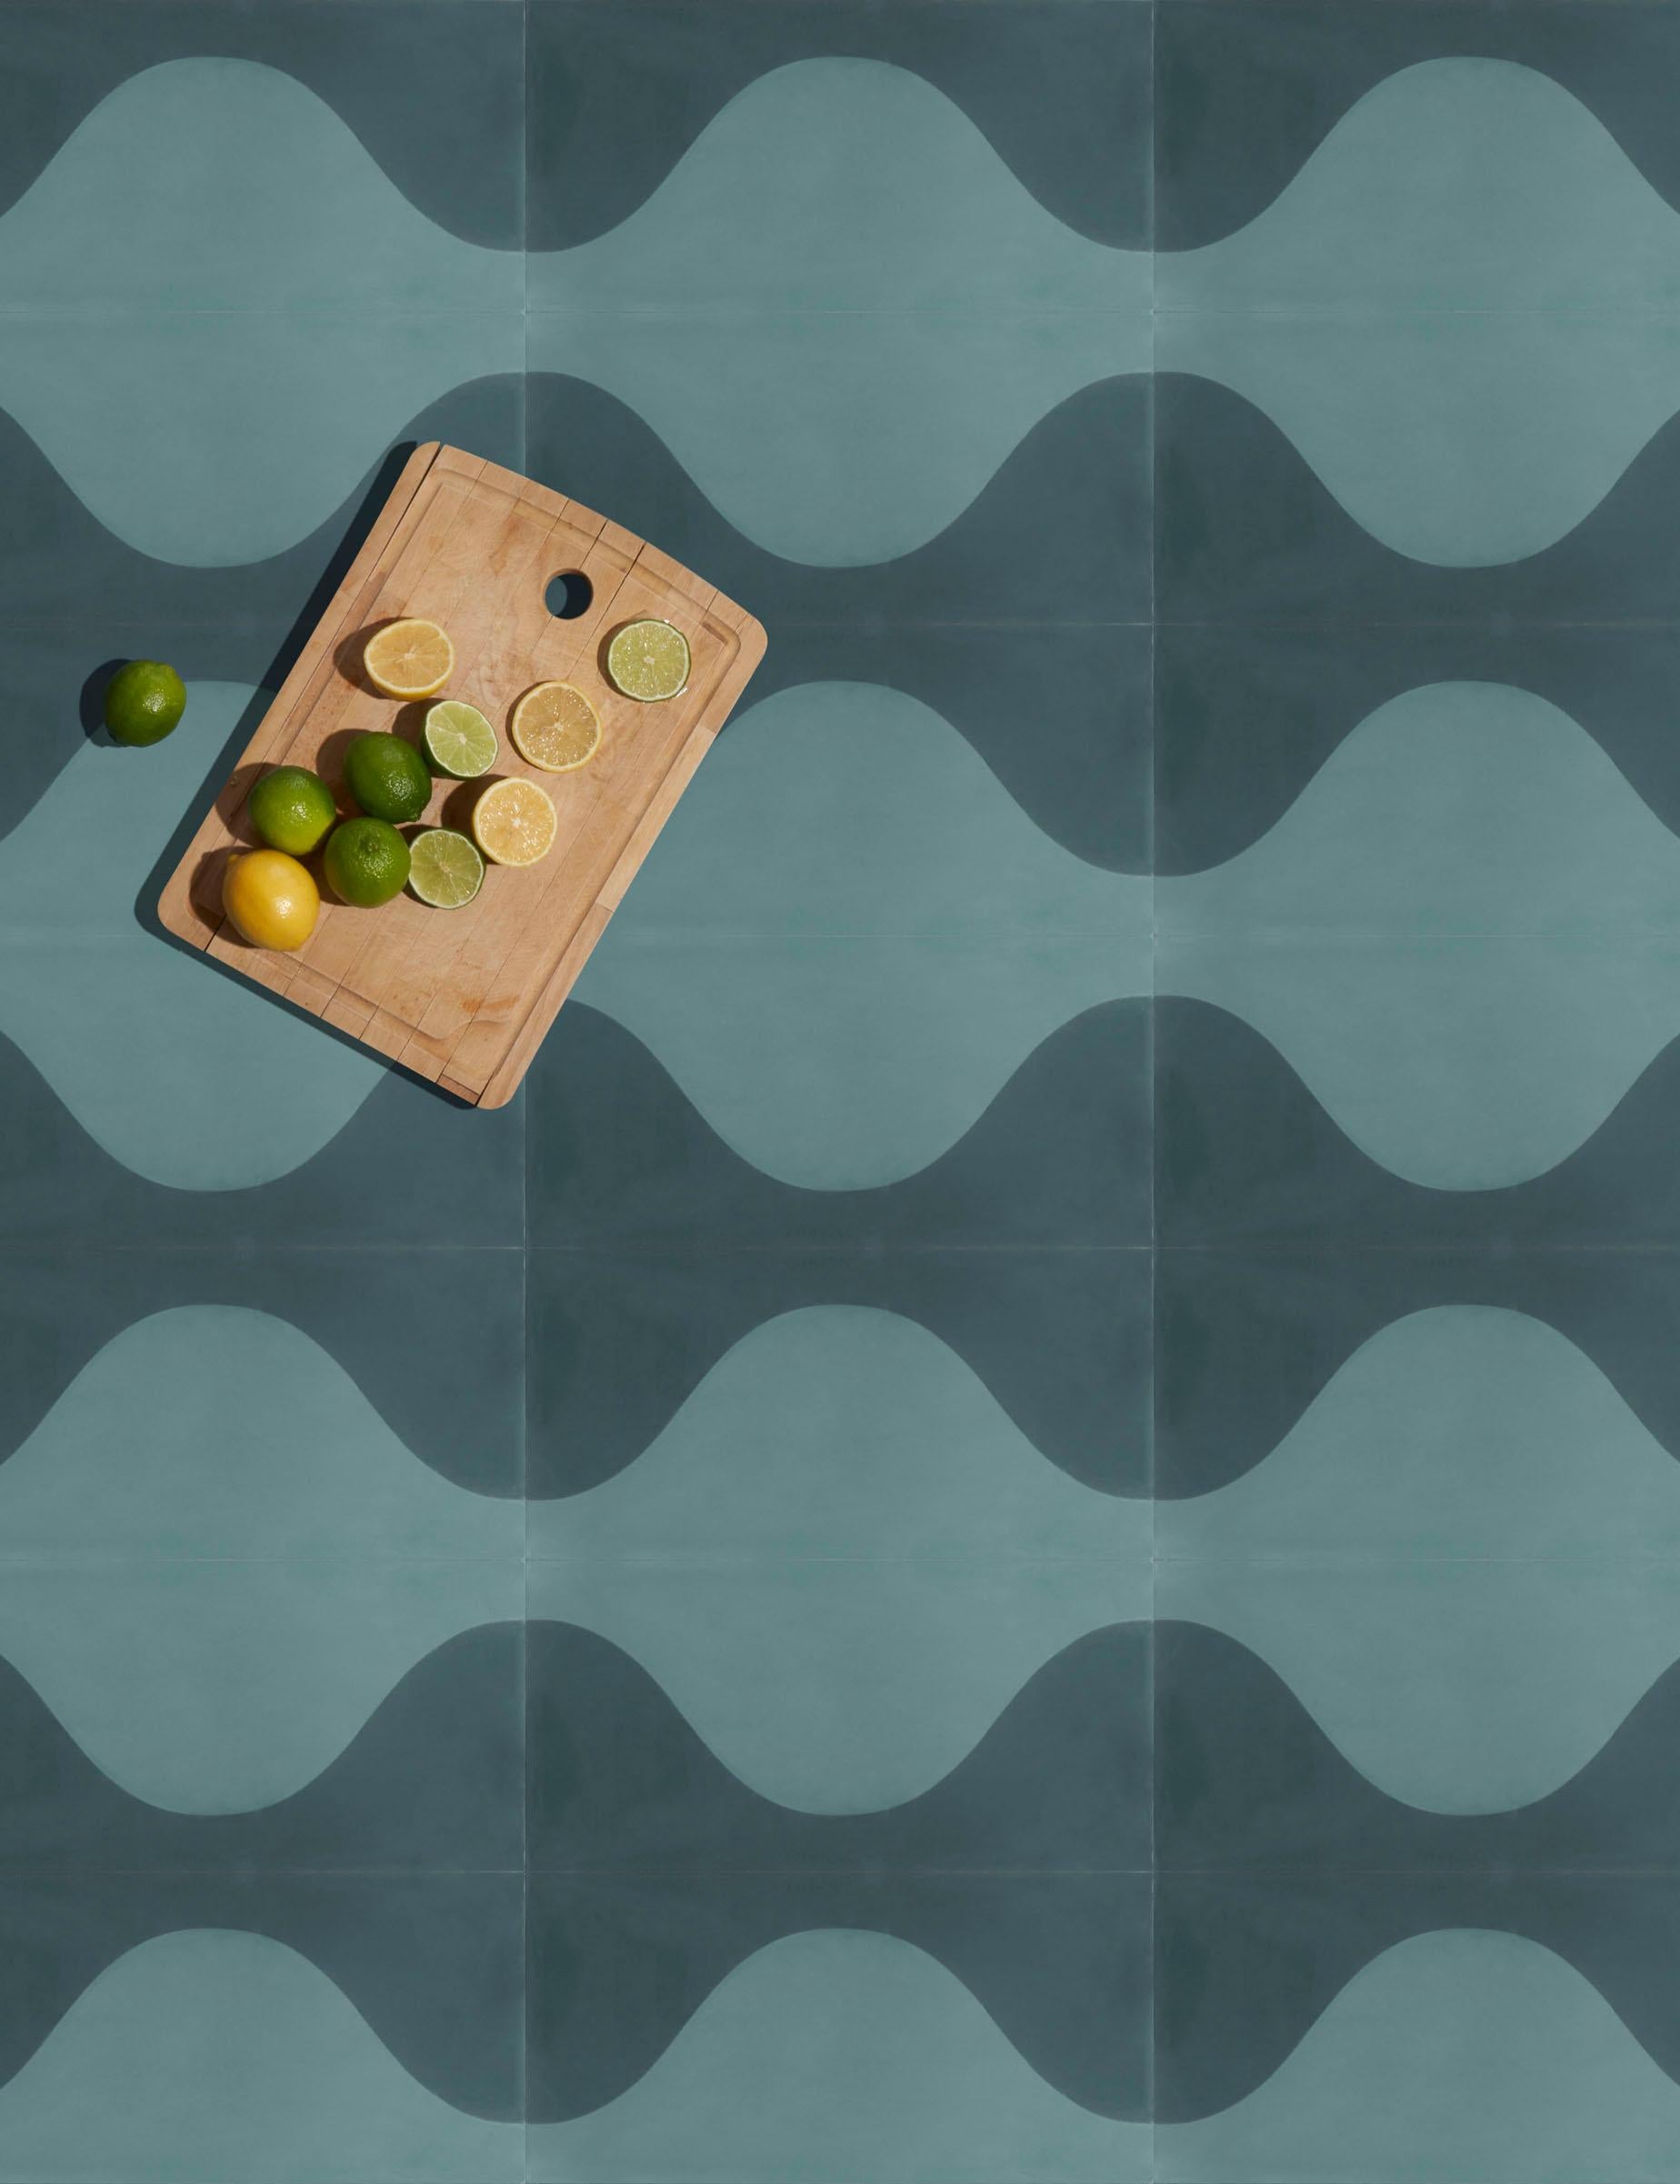 A wavy modular retro pattern that can be mixed and matched to create a dual-color or ombré pattern. 

Cement tiles
Type: Encaustic cement tile
Production process: Hydraulic pressing process
Materials: White cement, stone powder, additives, grey